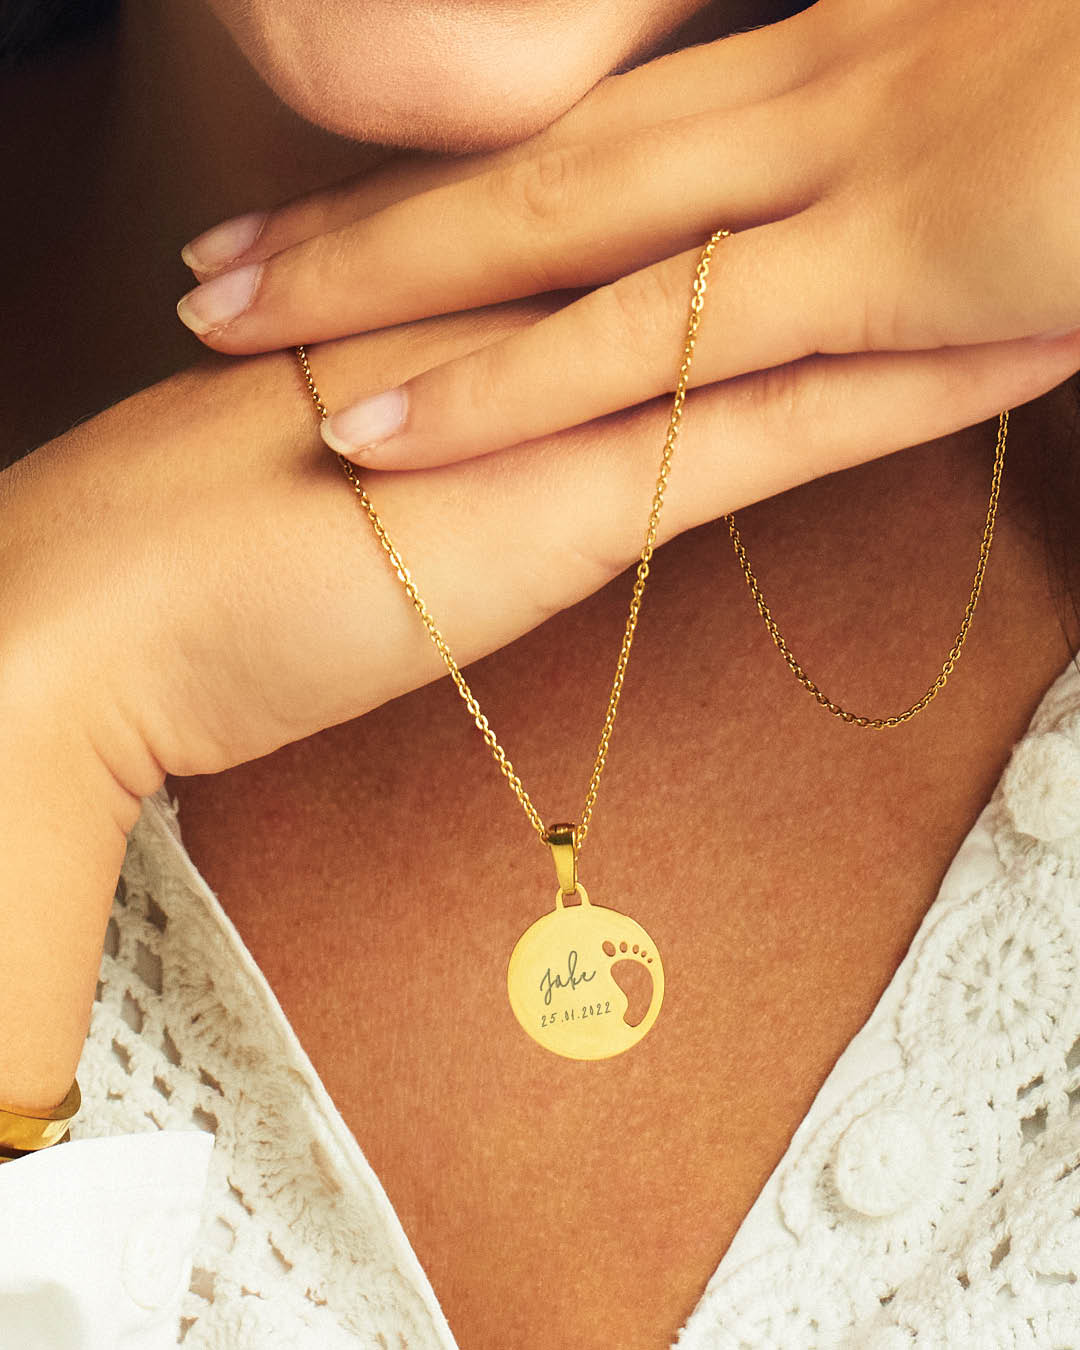 Buy Personalised New Mum Necklace With Baby Feet, Gift for New Mother Mom  Mum, Gift From New Dad to New Mum, New Baby Present for Mum Online in India  - Etsy